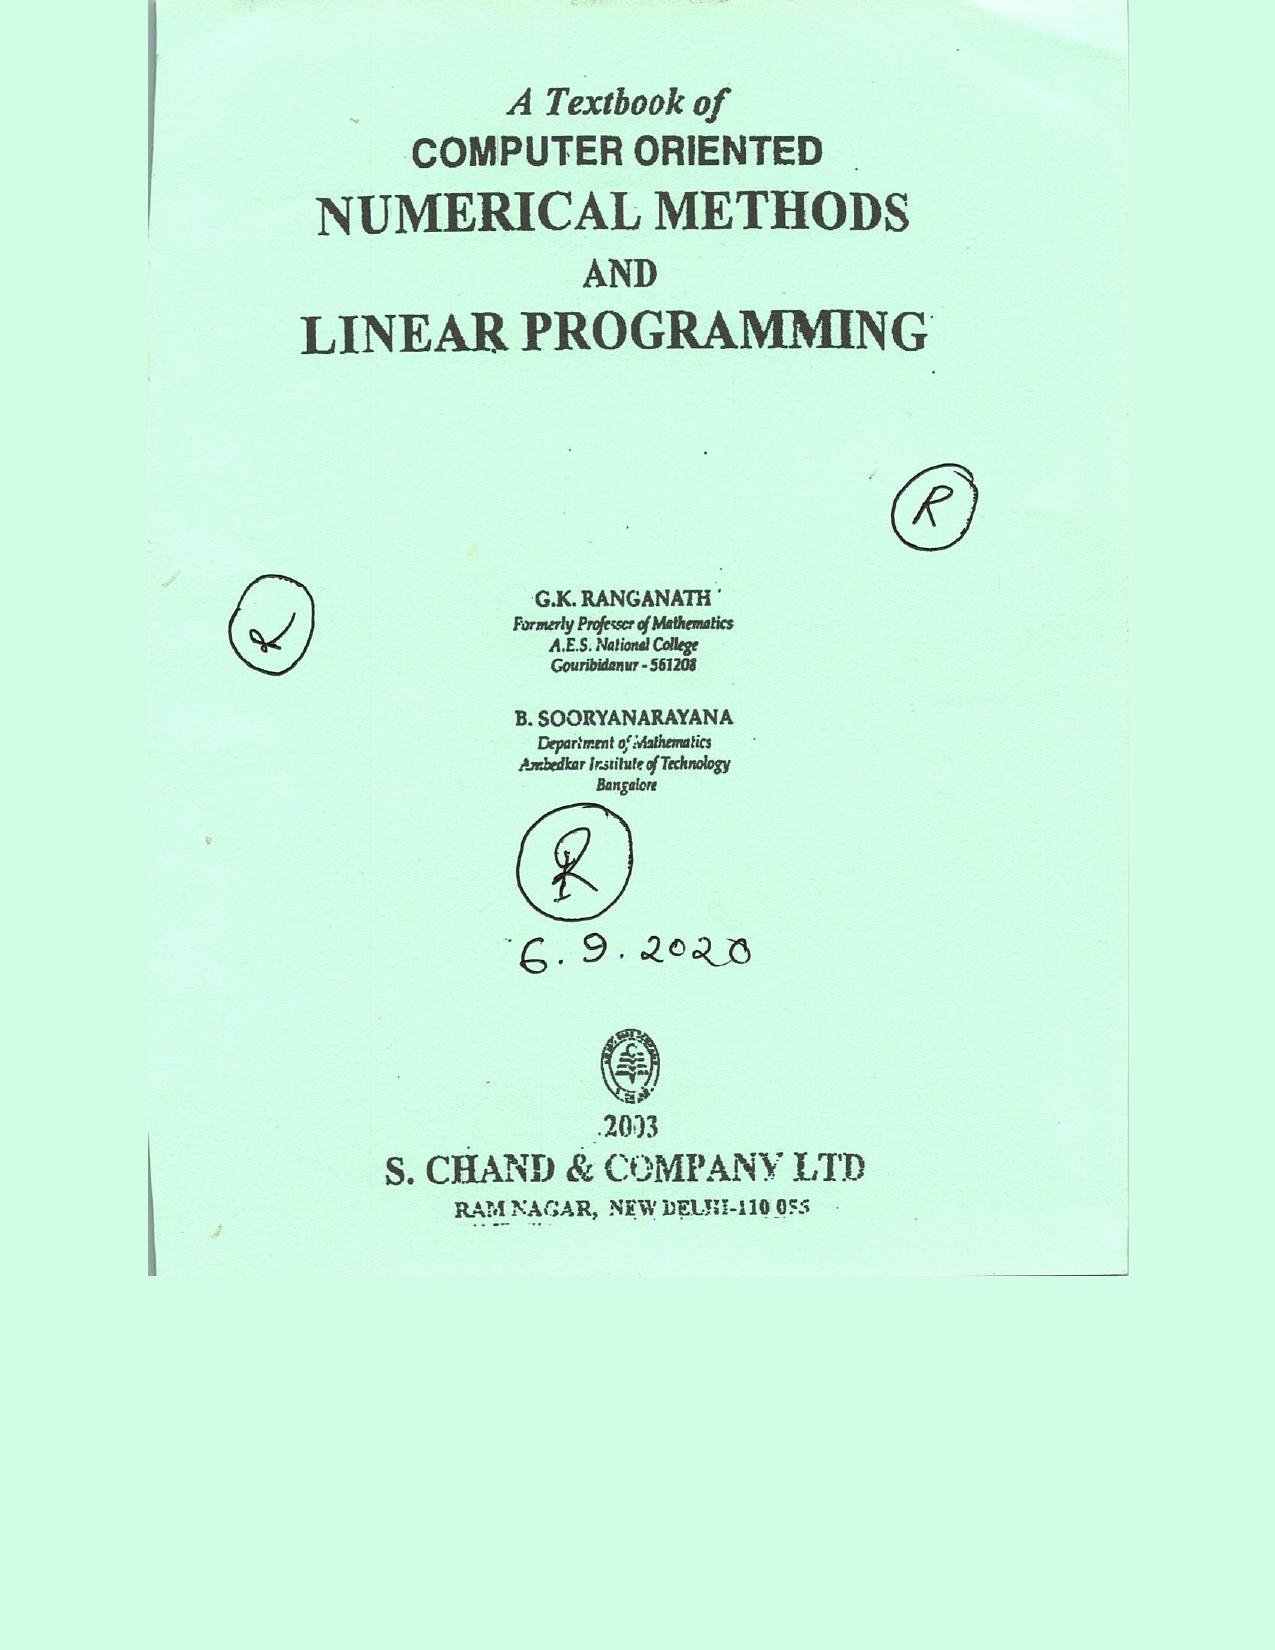 A Textbook of Computer Oriented Numerical Methods and Linear Programming